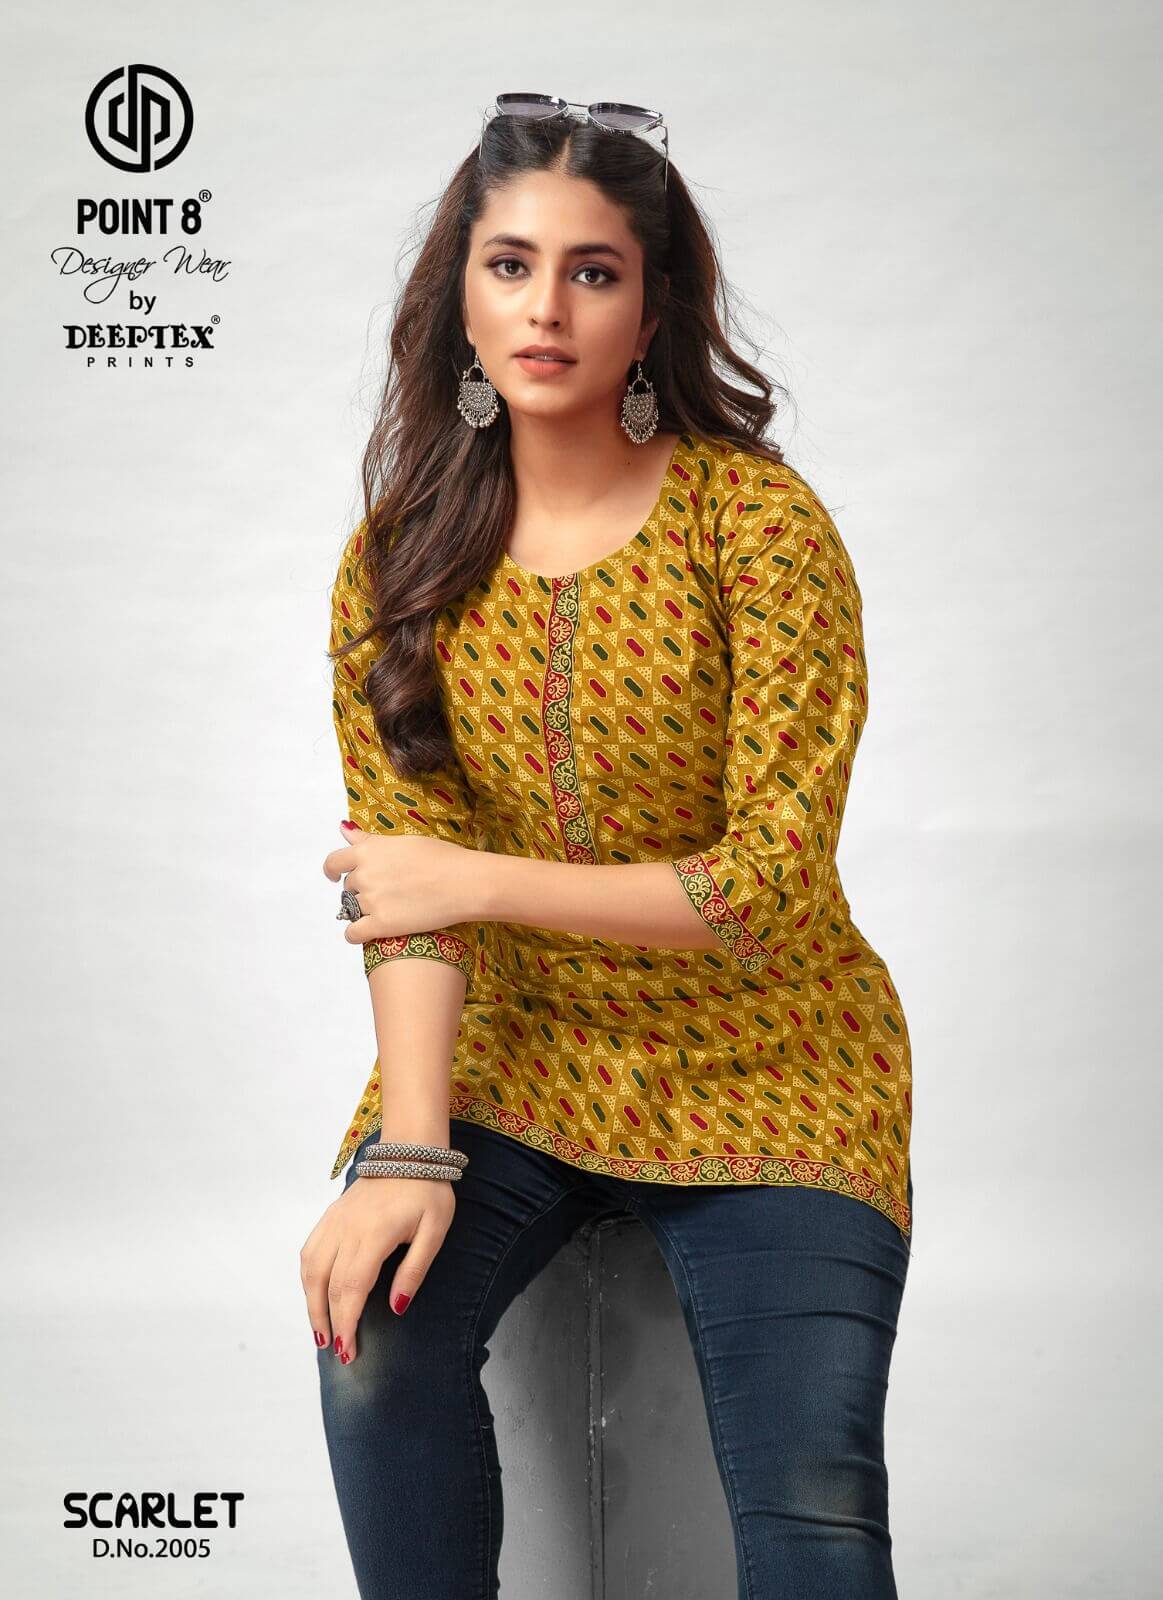 Deeptex Point 8 Scarlet vol 2 Ladies Tops Catalog collection 7